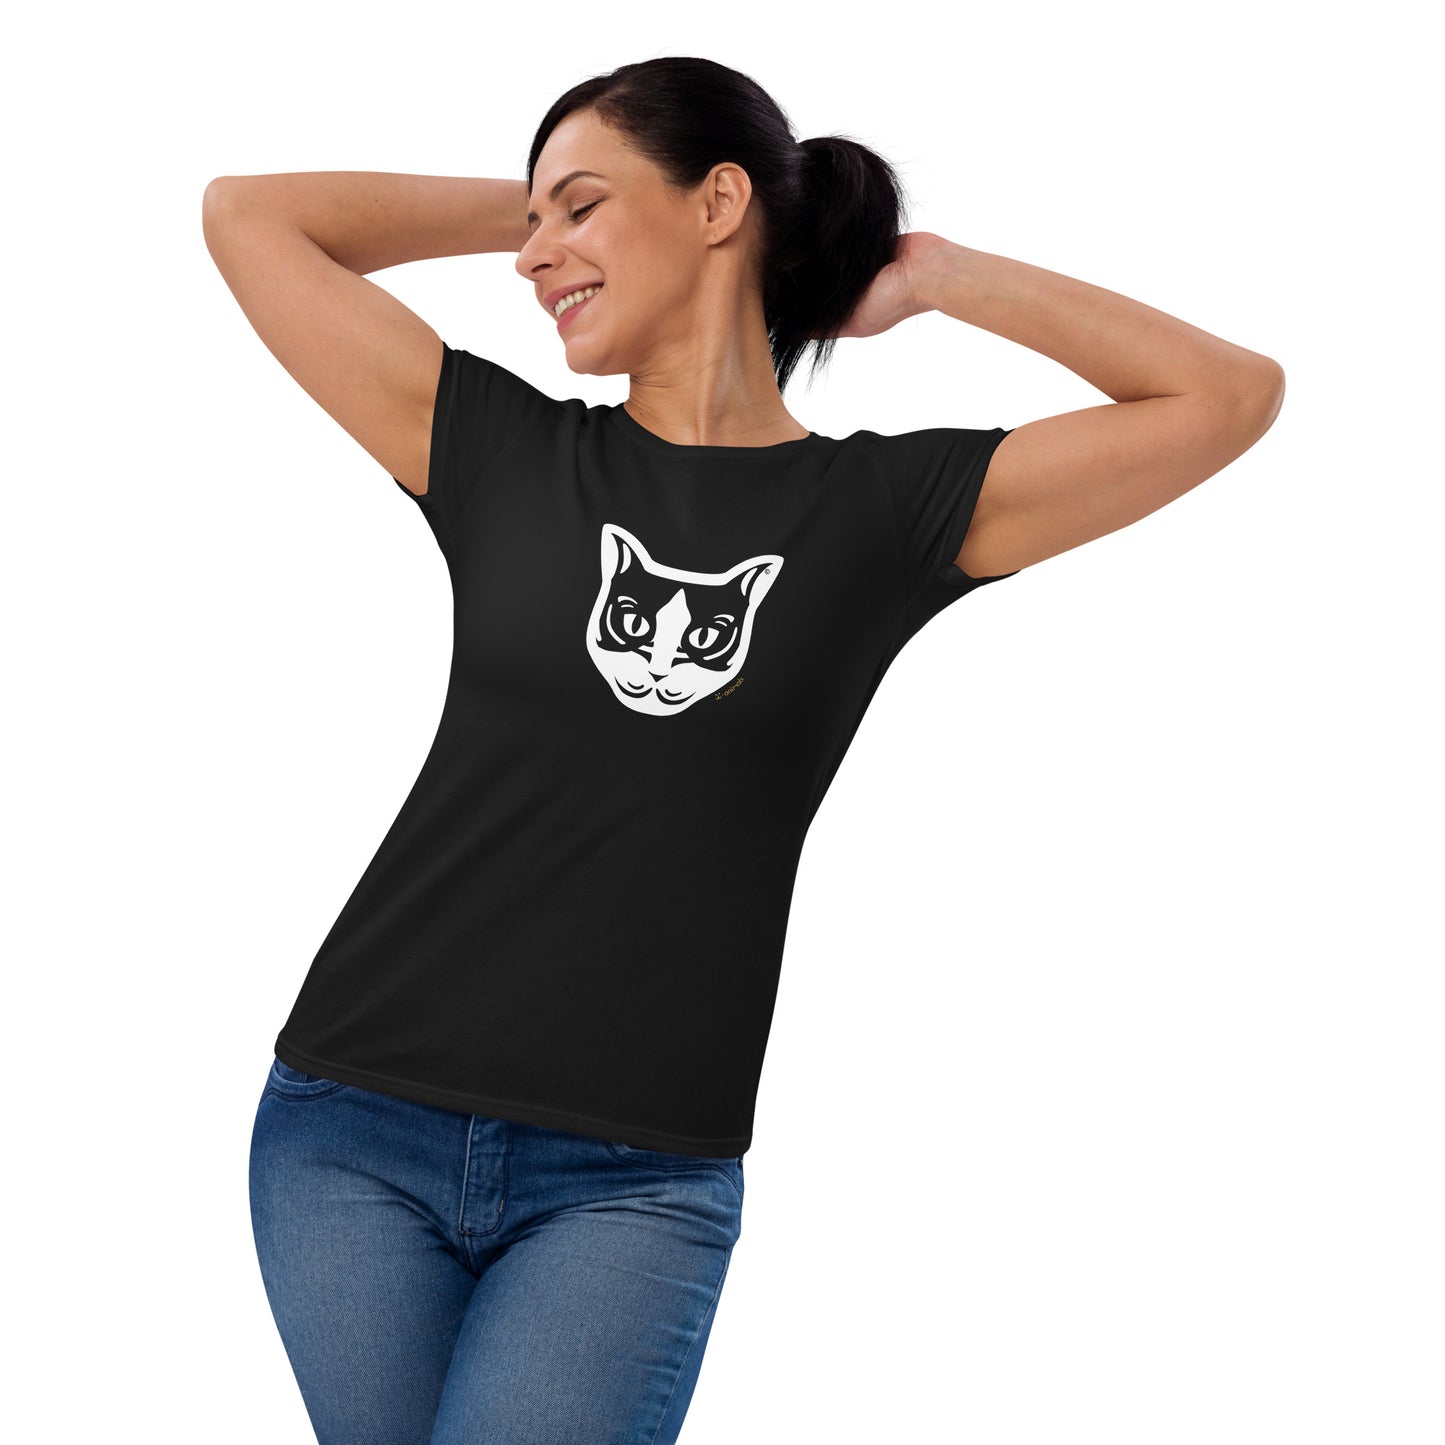 Women's Fashion Fit T-Shirt - Black and White Ca - Tribal